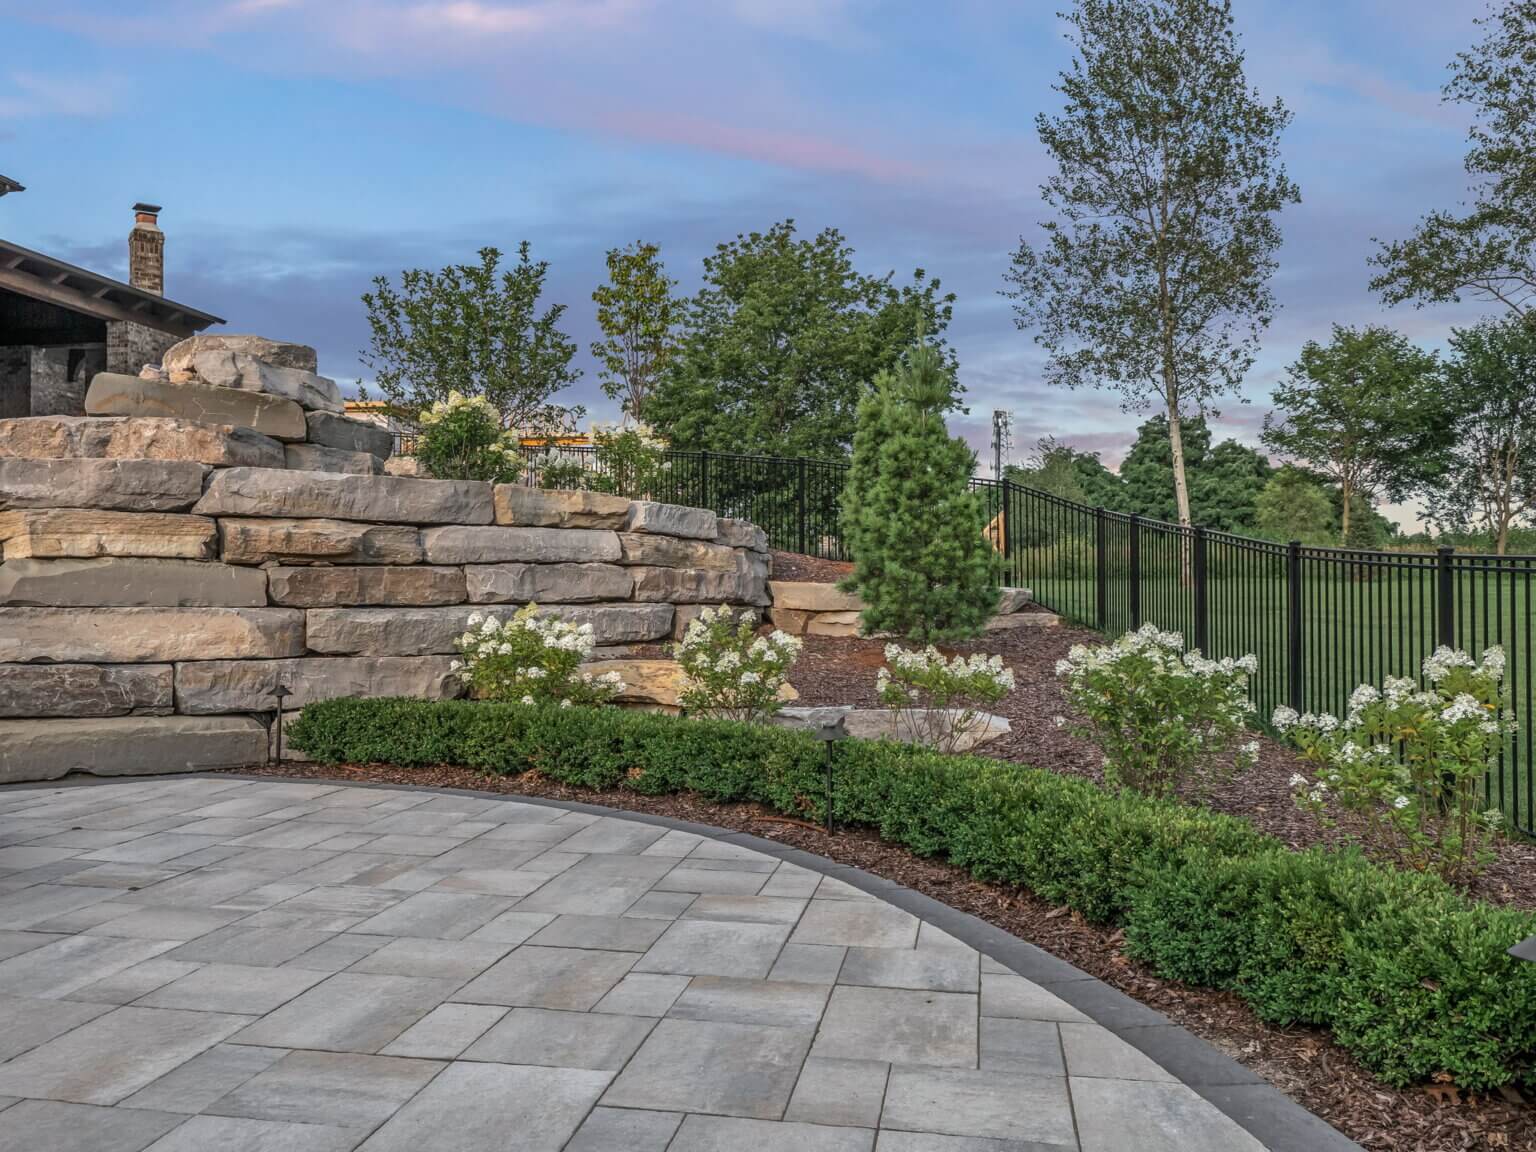 land scaping services landscaping rochester hills mi landscaping & construction pool and landscape contractors lawn landscaping near me patio and landscaping companies near me landscape installation companies near me land scaping near me landscaping and pool installation patio landscaping companies near me pool installation and landscaping top ten landscaping companies near me outdoor landscape contractors pool and landscape contractors near me pool and landscaping companies near me landscaping stone work near me pool and hardscape contractors near me